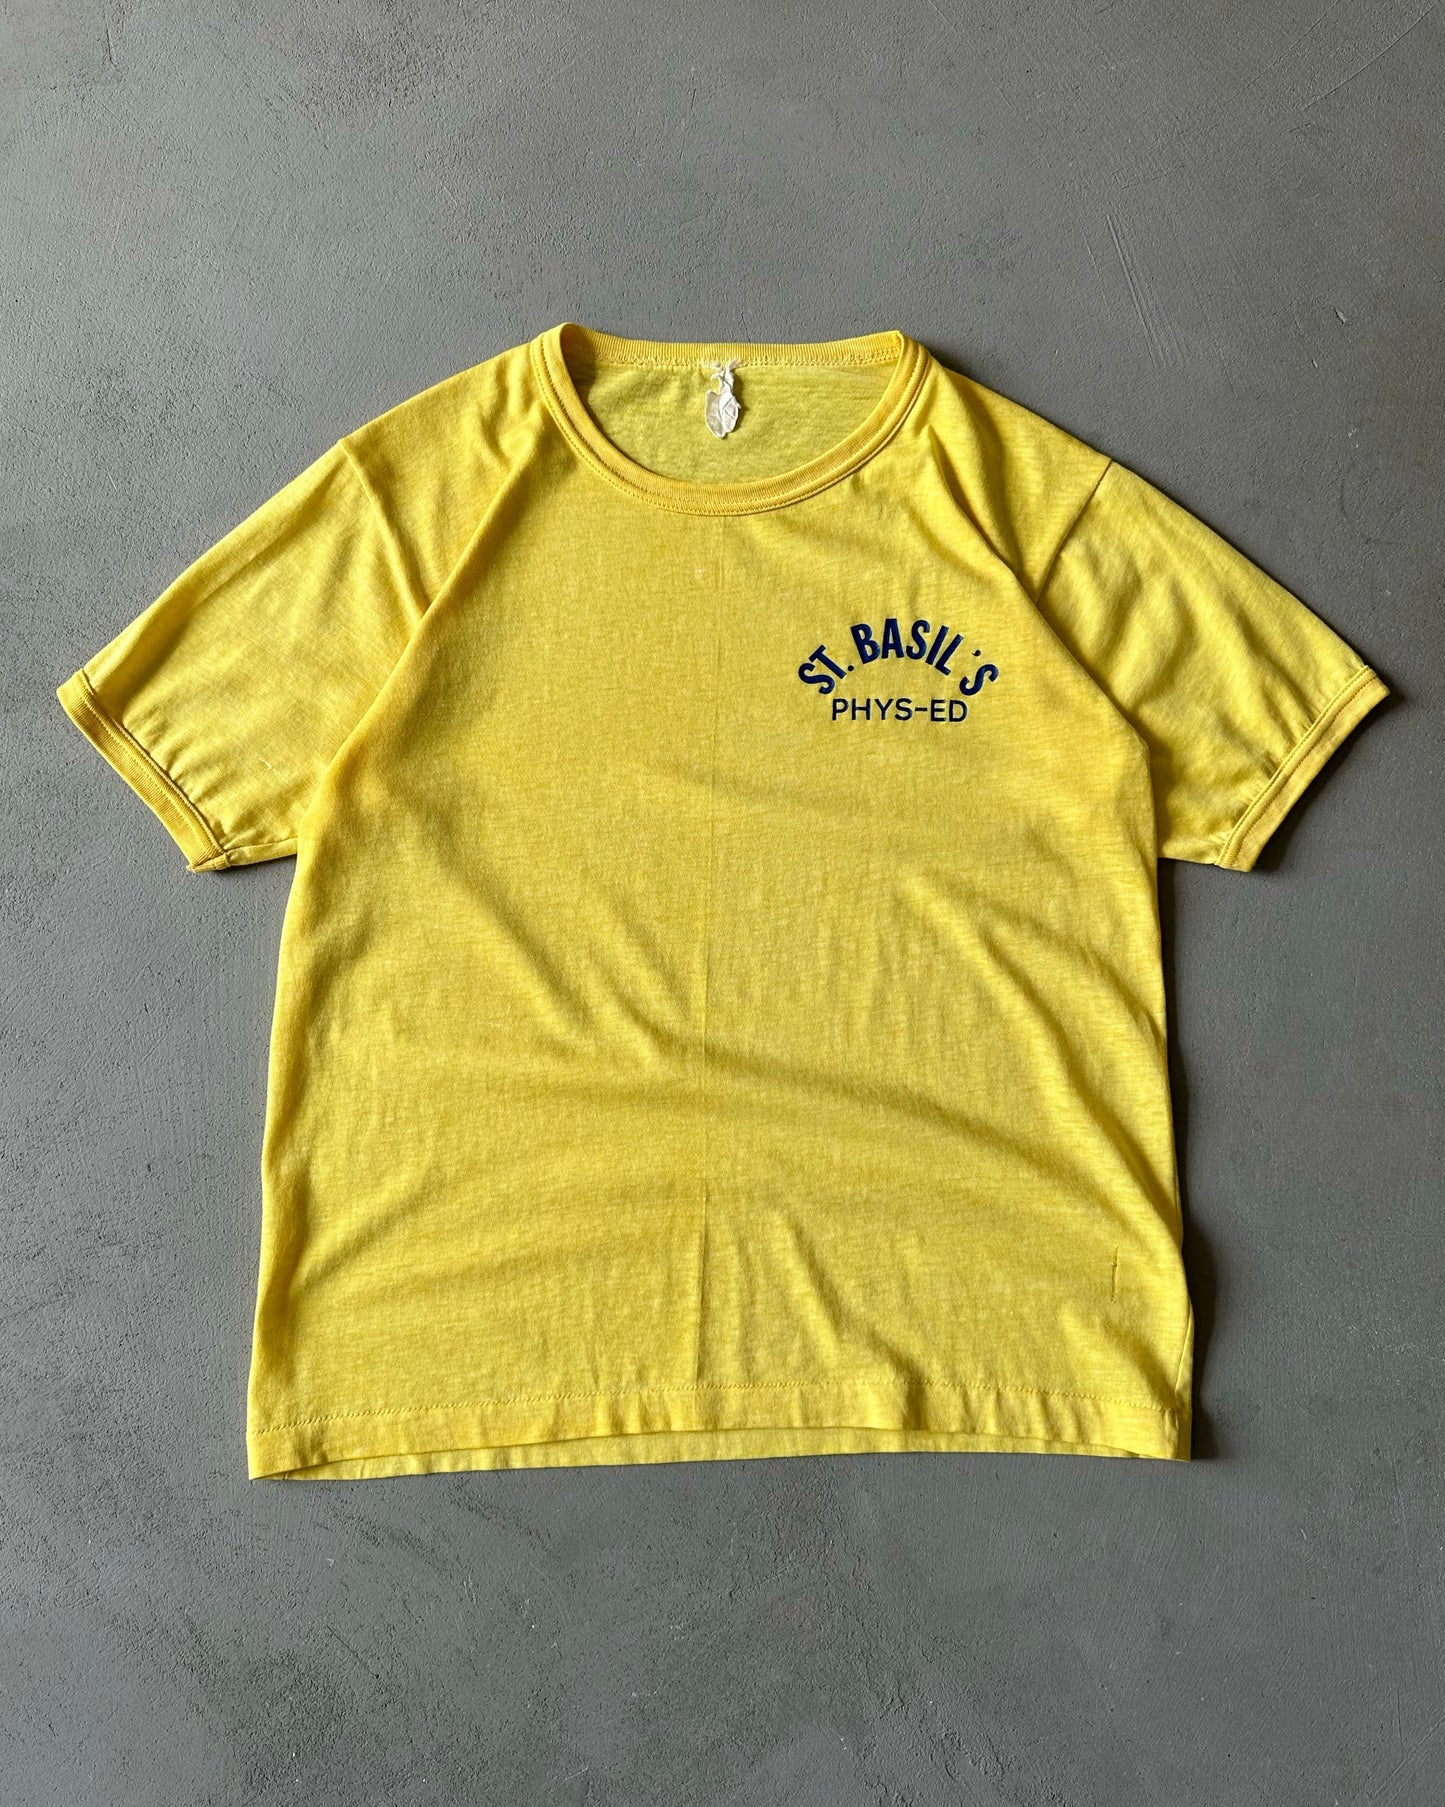 1980s - Yellow "St.Basil's" Ringer Cropped T-Shirt - S